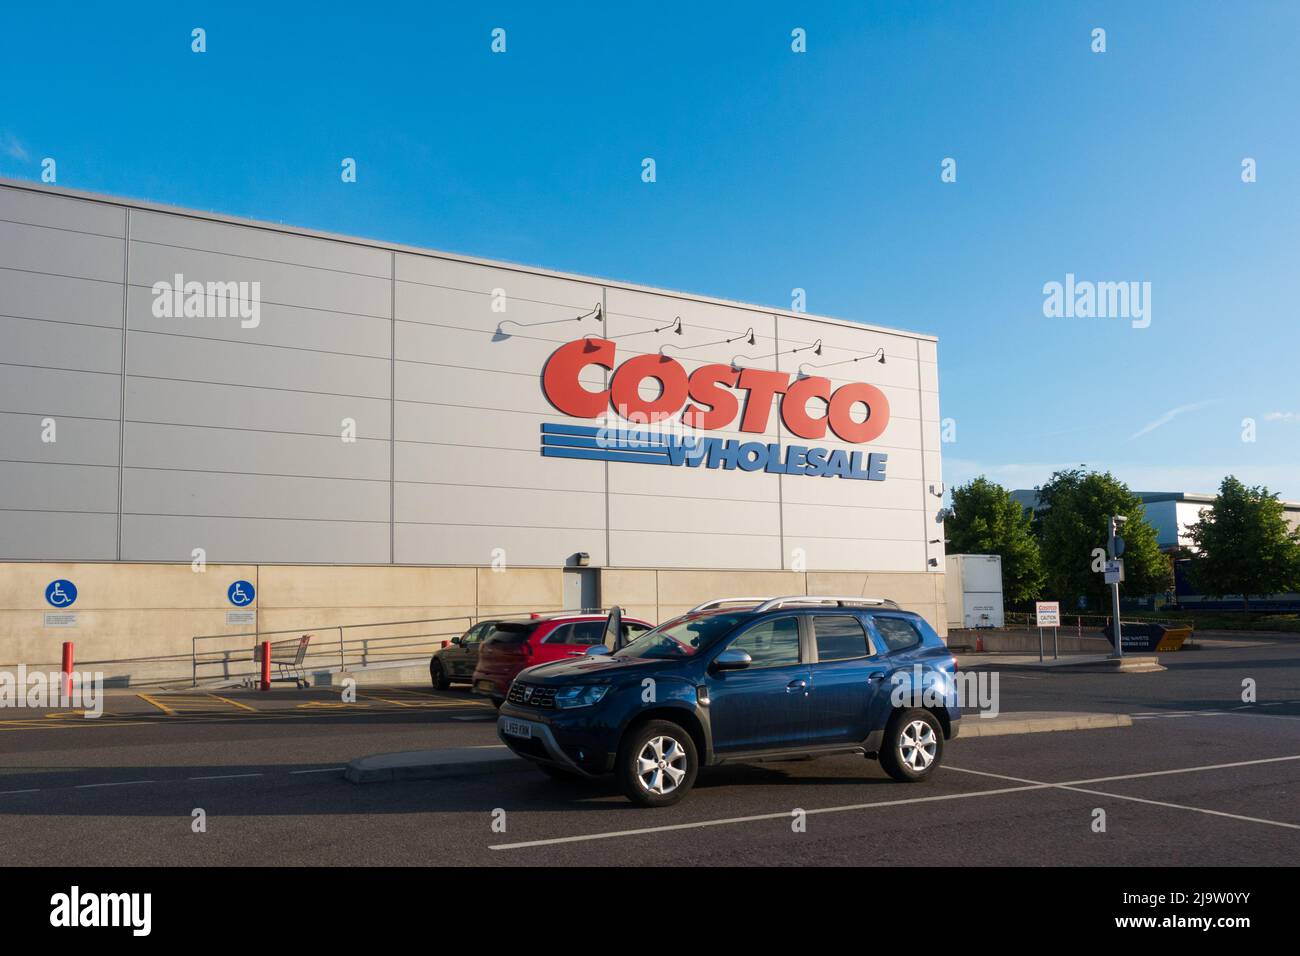 Costco UK  store as viewed from parking area Stock Photo